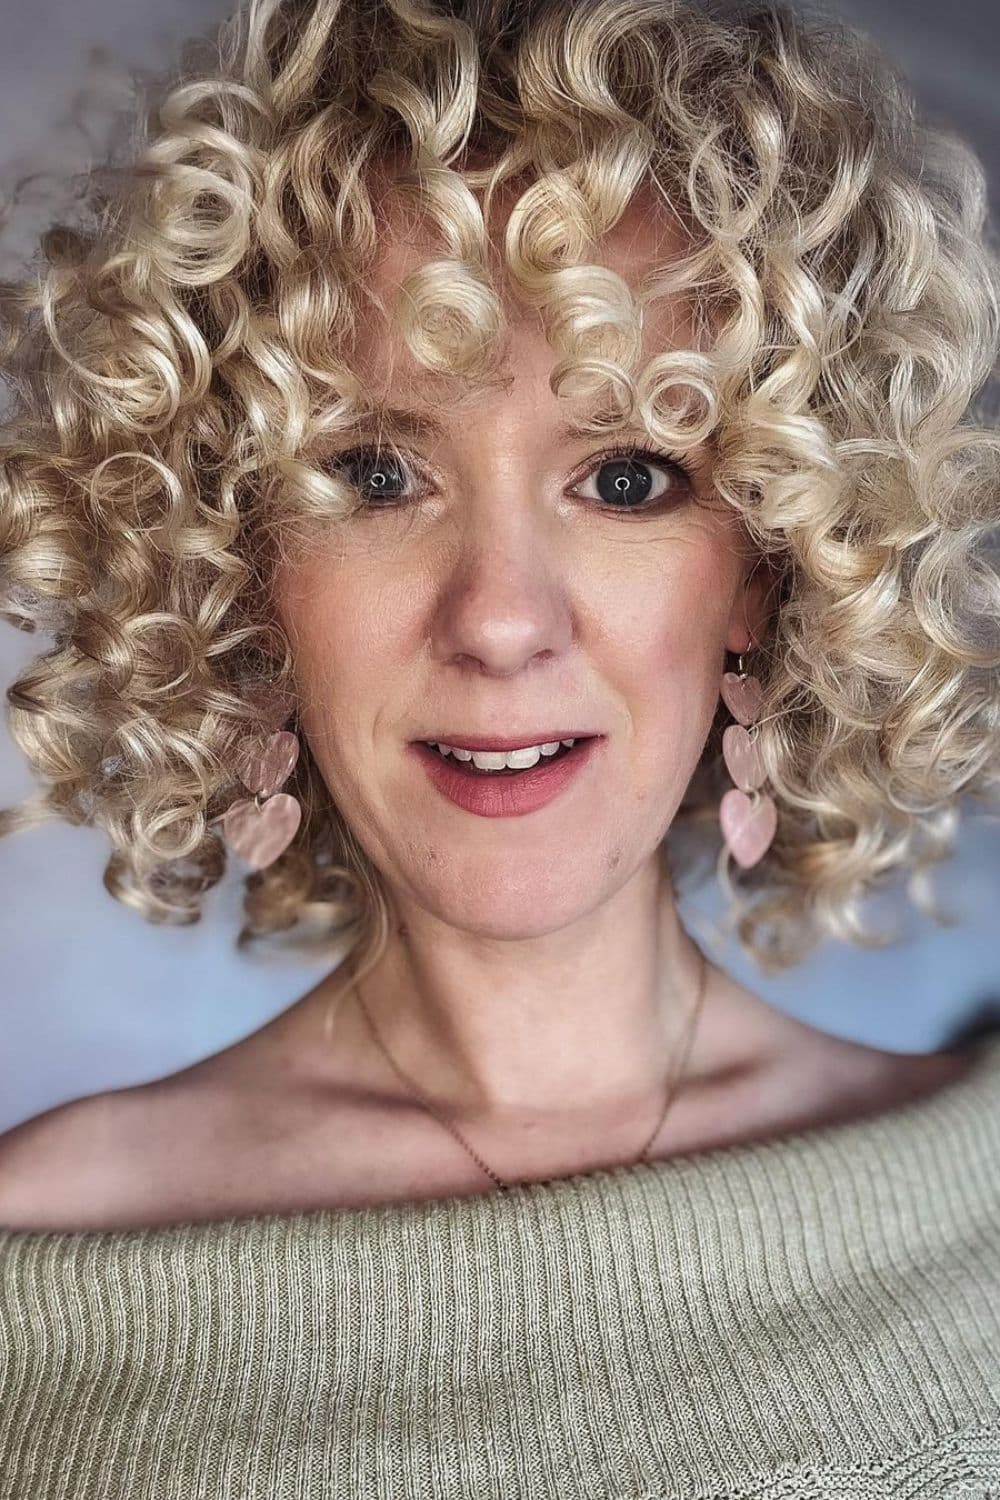 A woman with blonde deva cut with curly bangs.